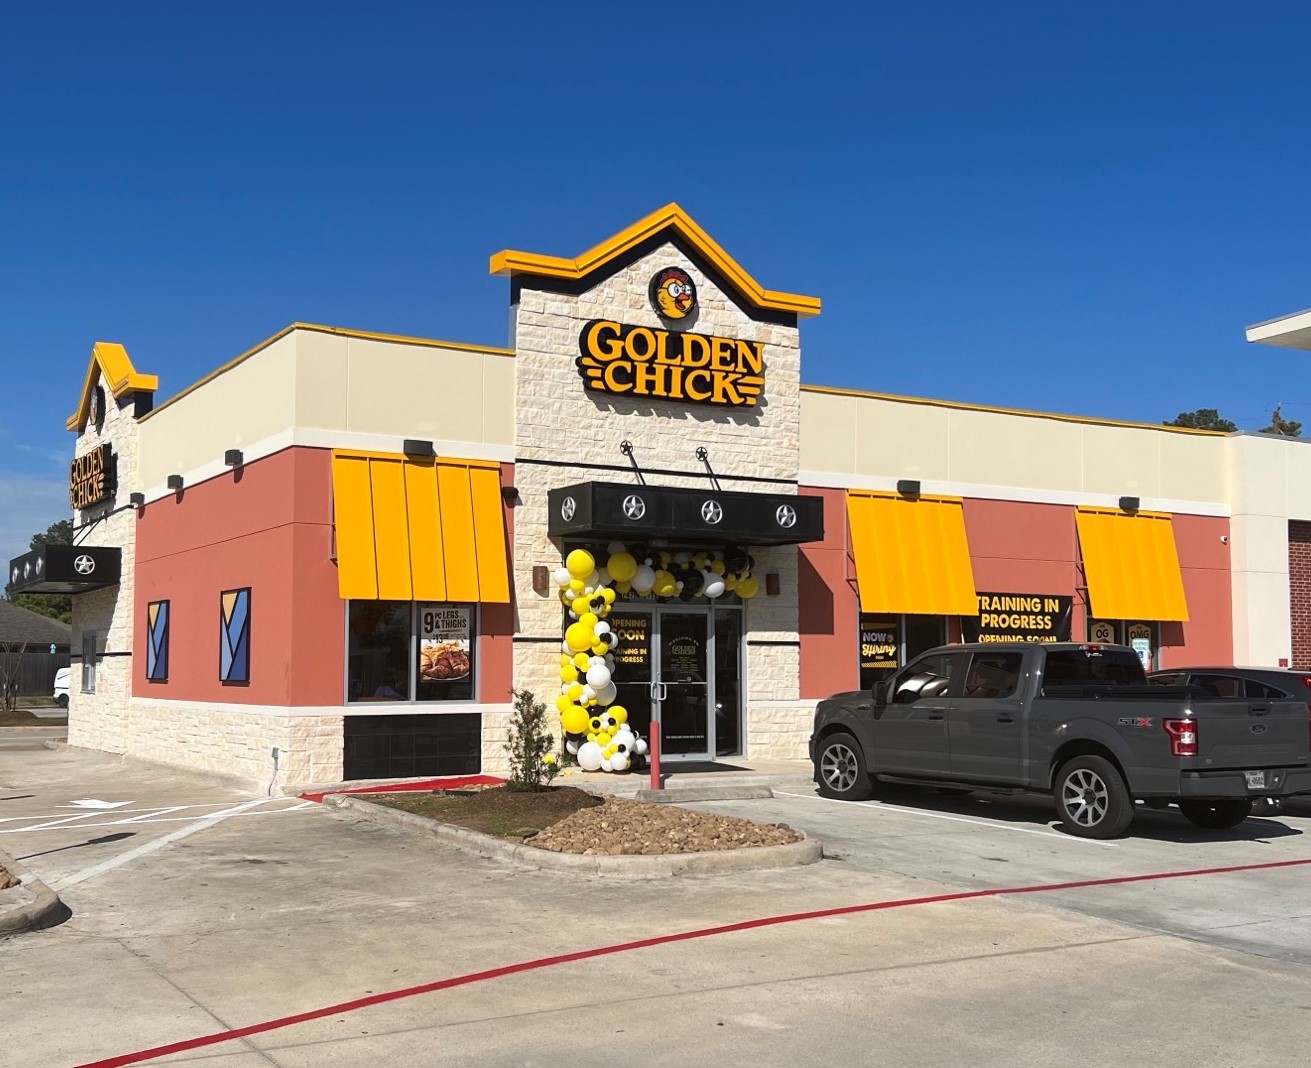 Golden Chick storefront.  Your local Golden Chick fast food restaurant in Spring, Texas